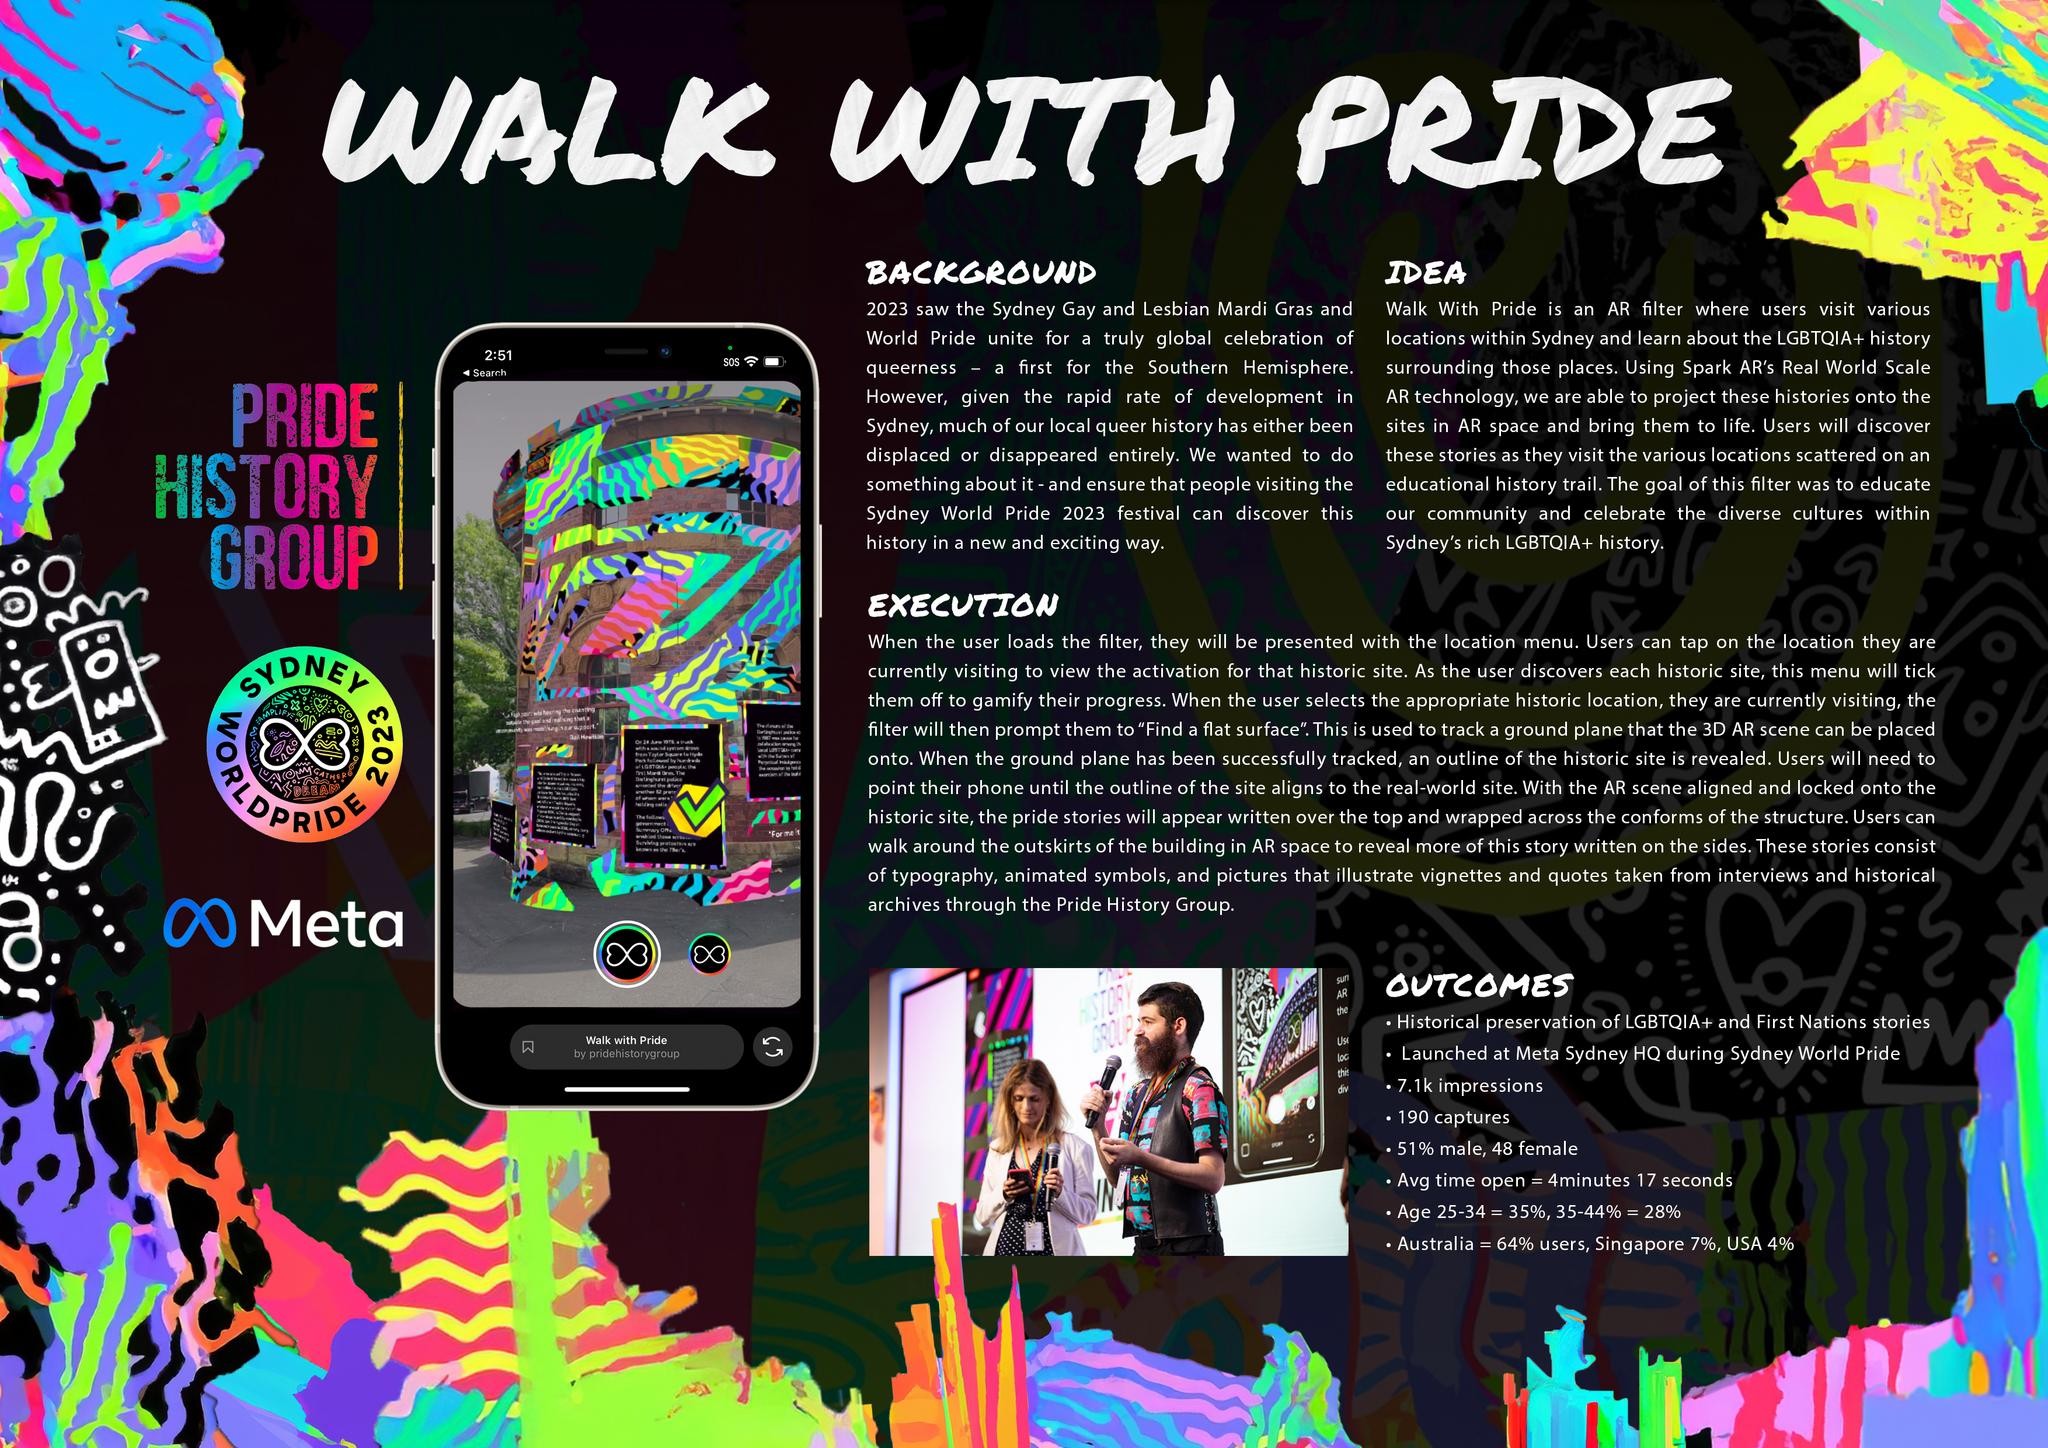 Walk With Pride